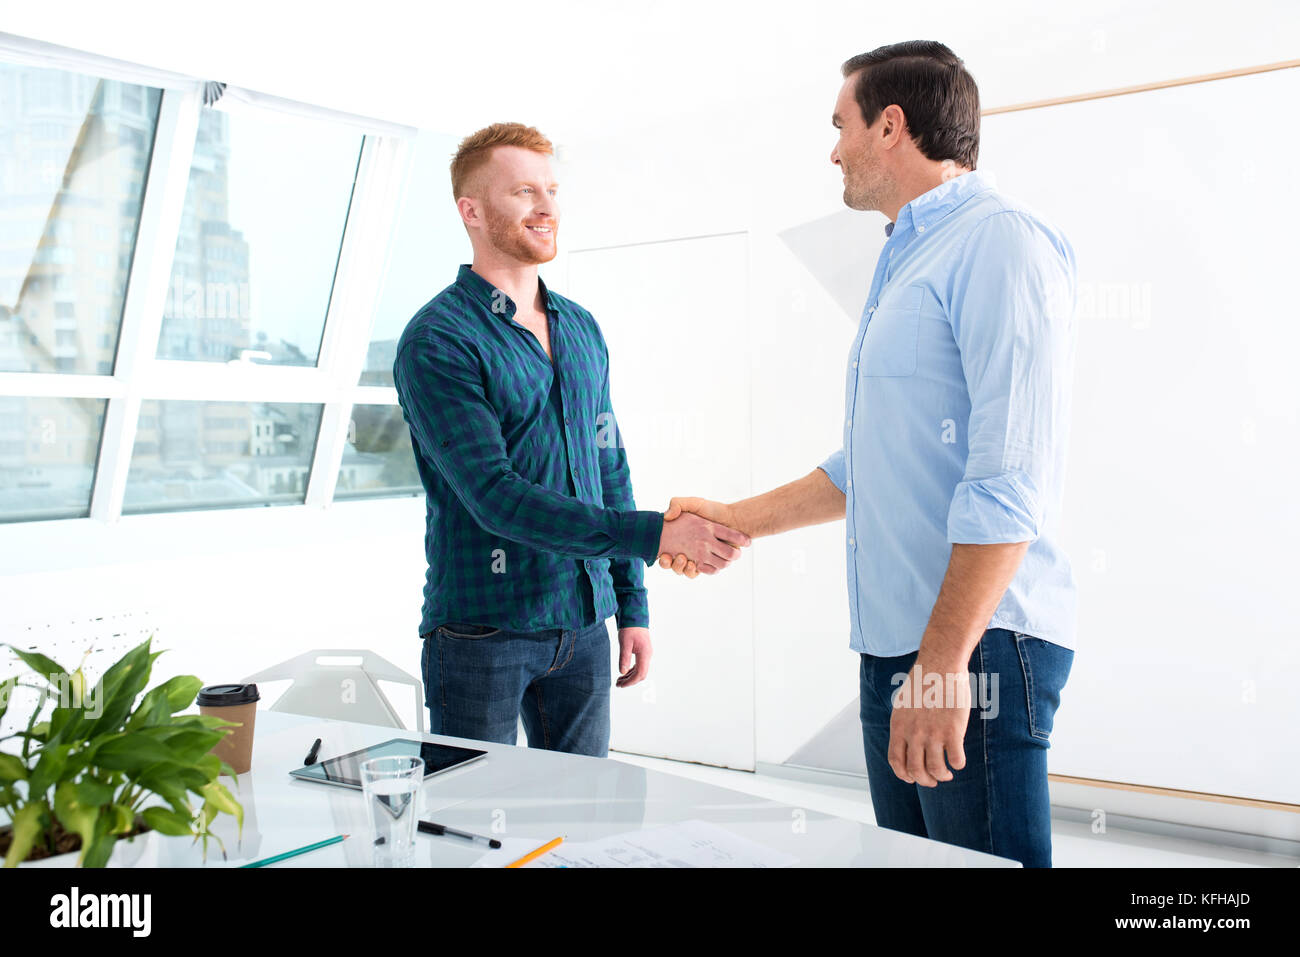 Handshaking business person in office. concept of teamwork and partnership Stock Photo